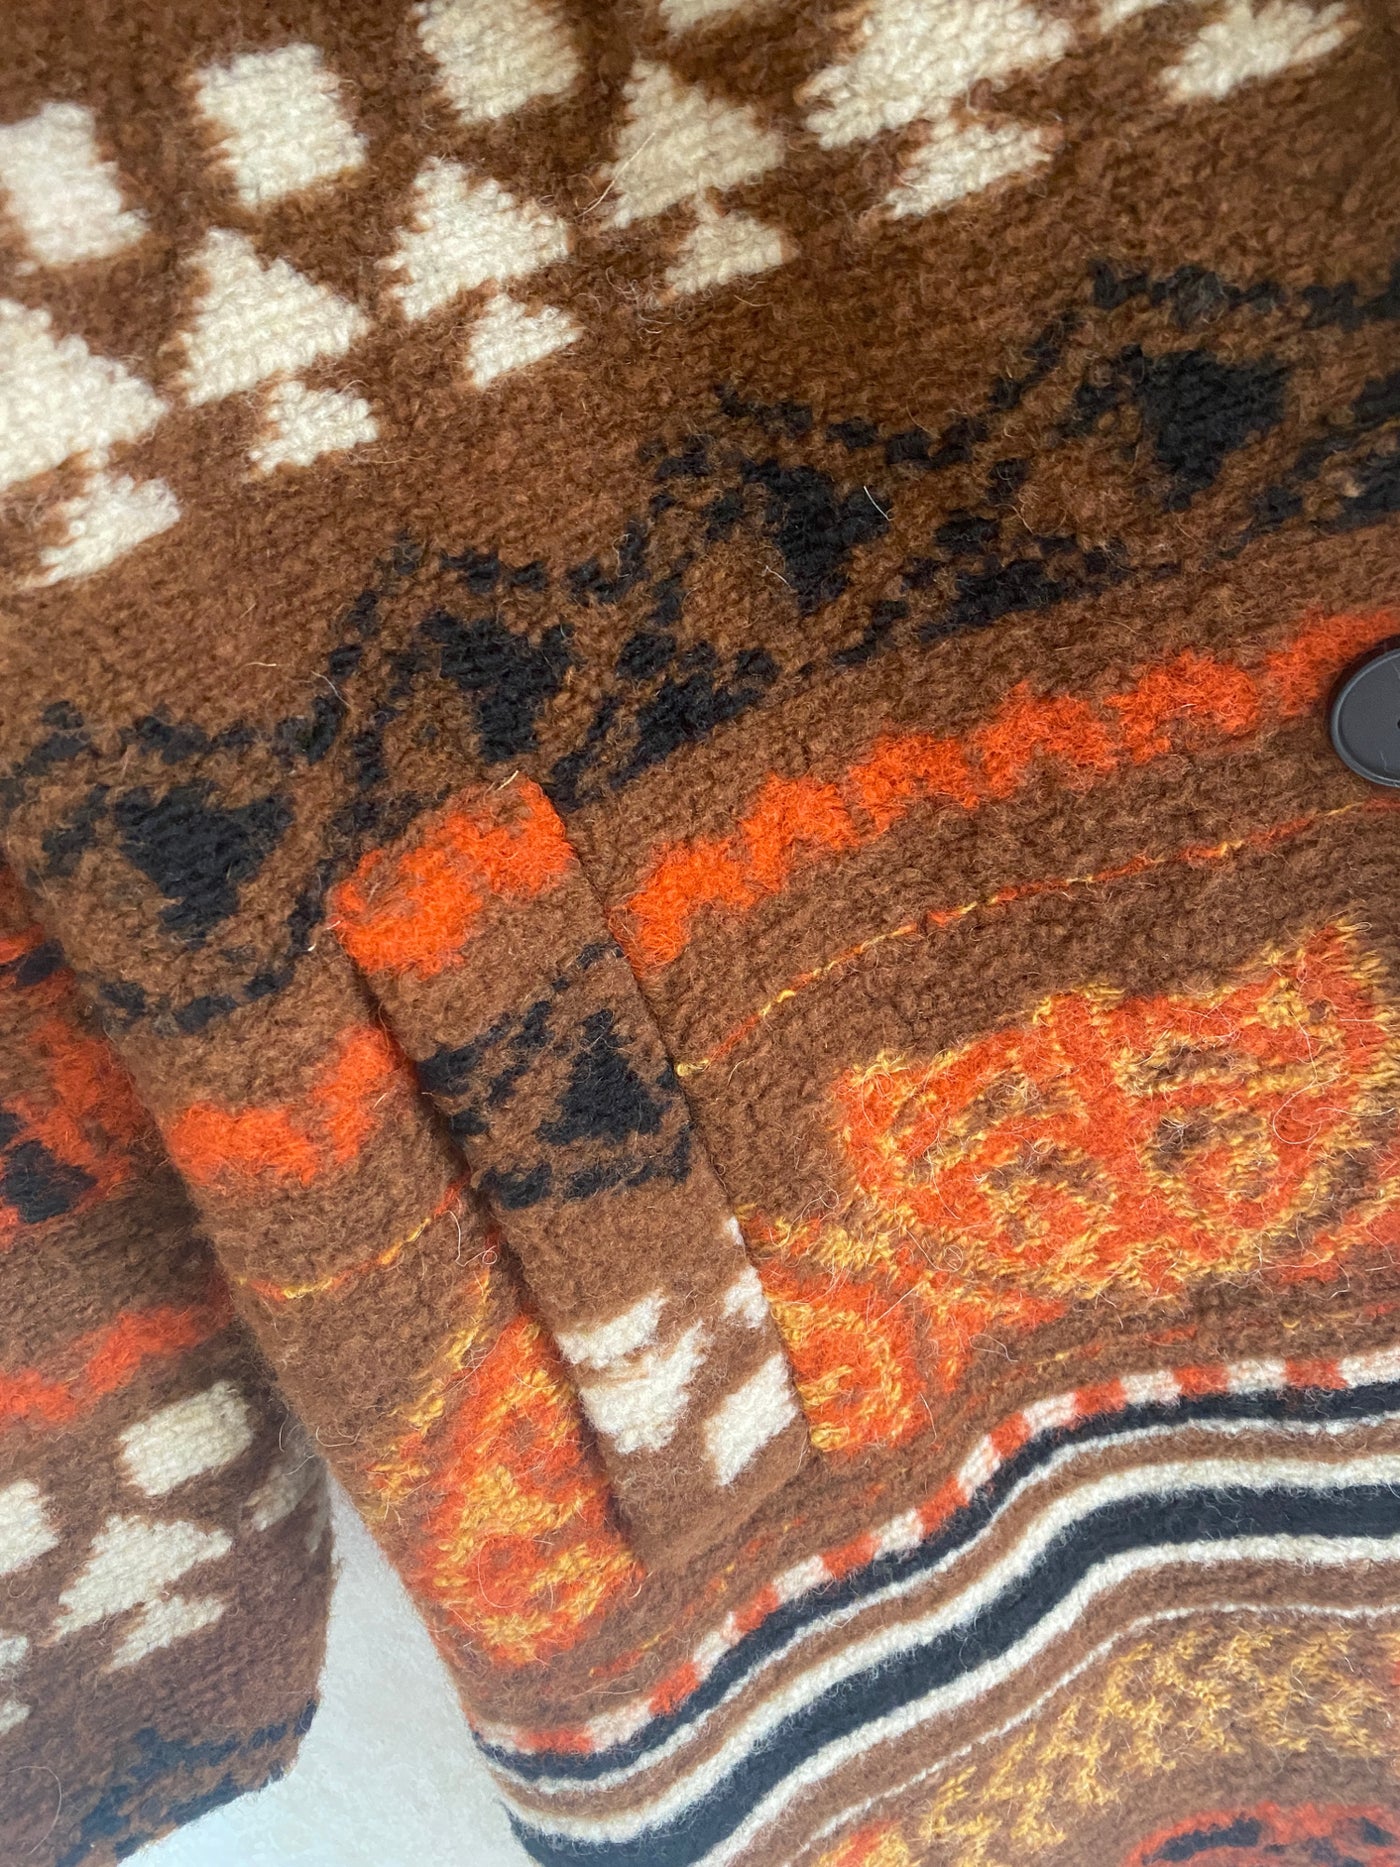 A Mantel Terrakotta retro sweater with a pattern on it in autumn colors by mein herzblut.